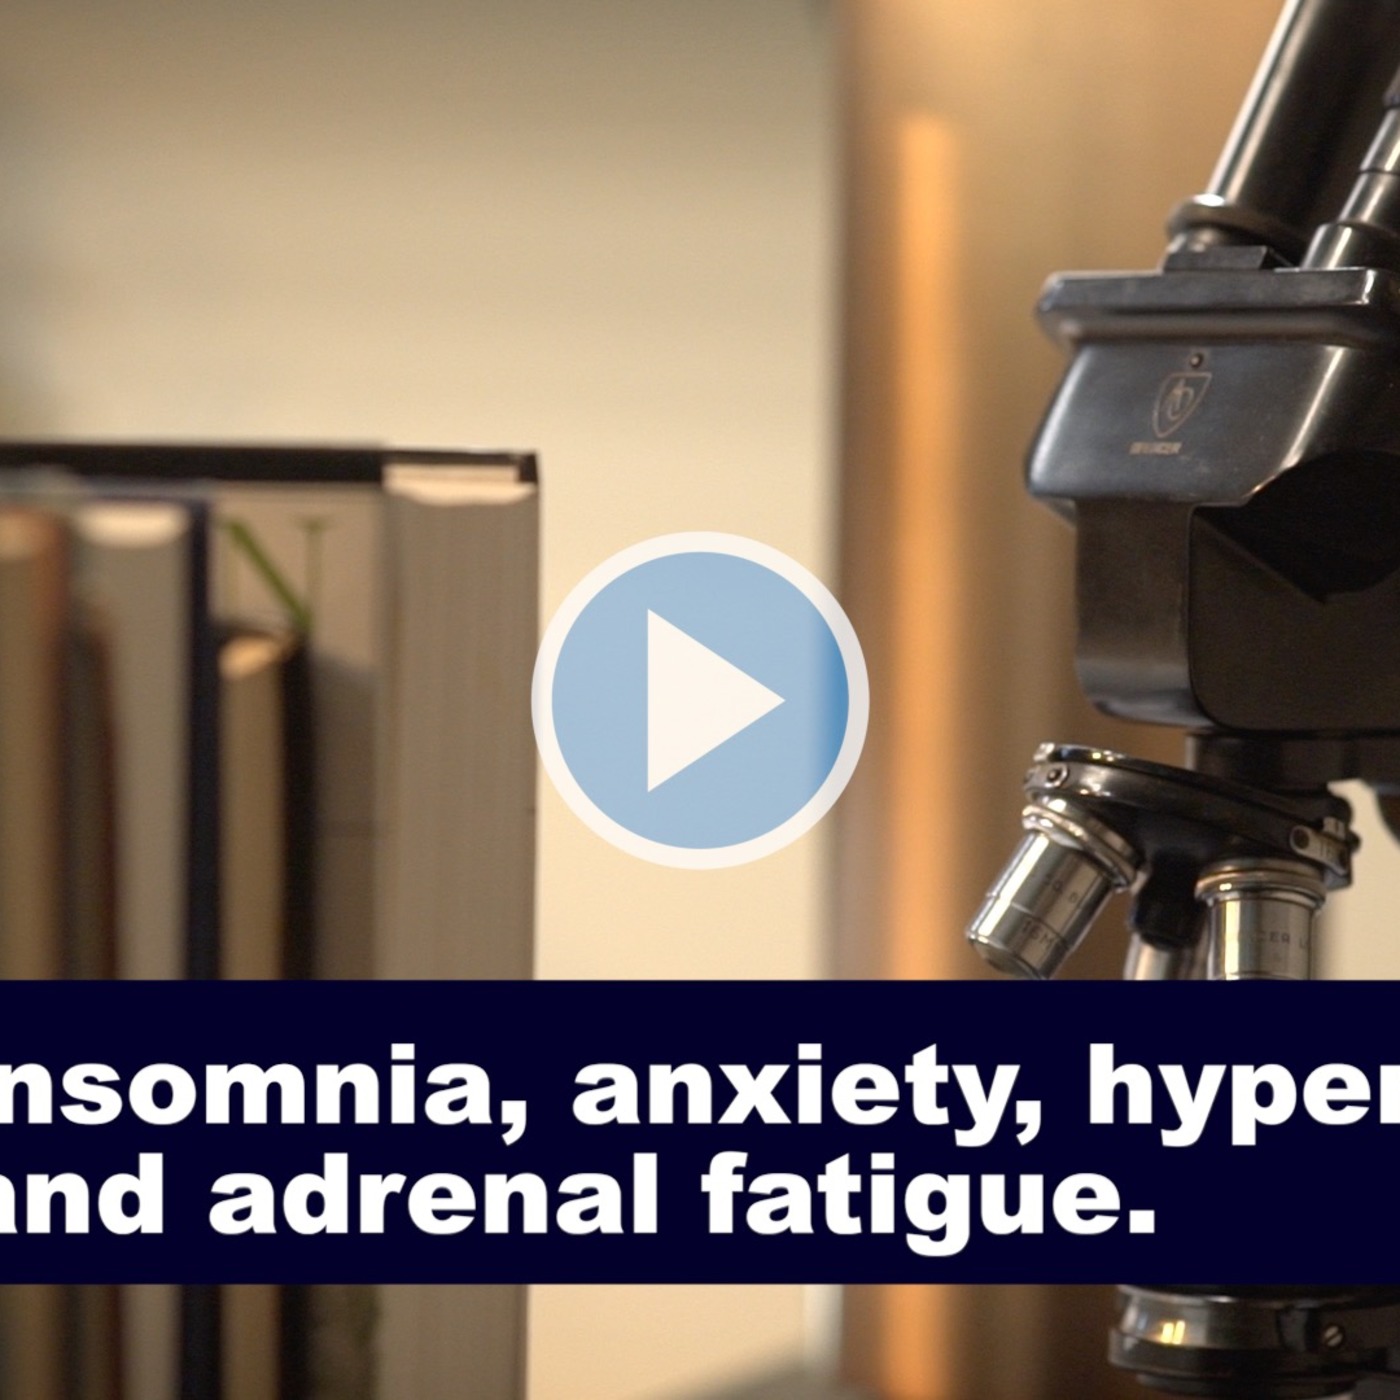 In Depth with Dr. Wright - Insomnia, Anxiety, Hypertension and Adrenal Fatigue